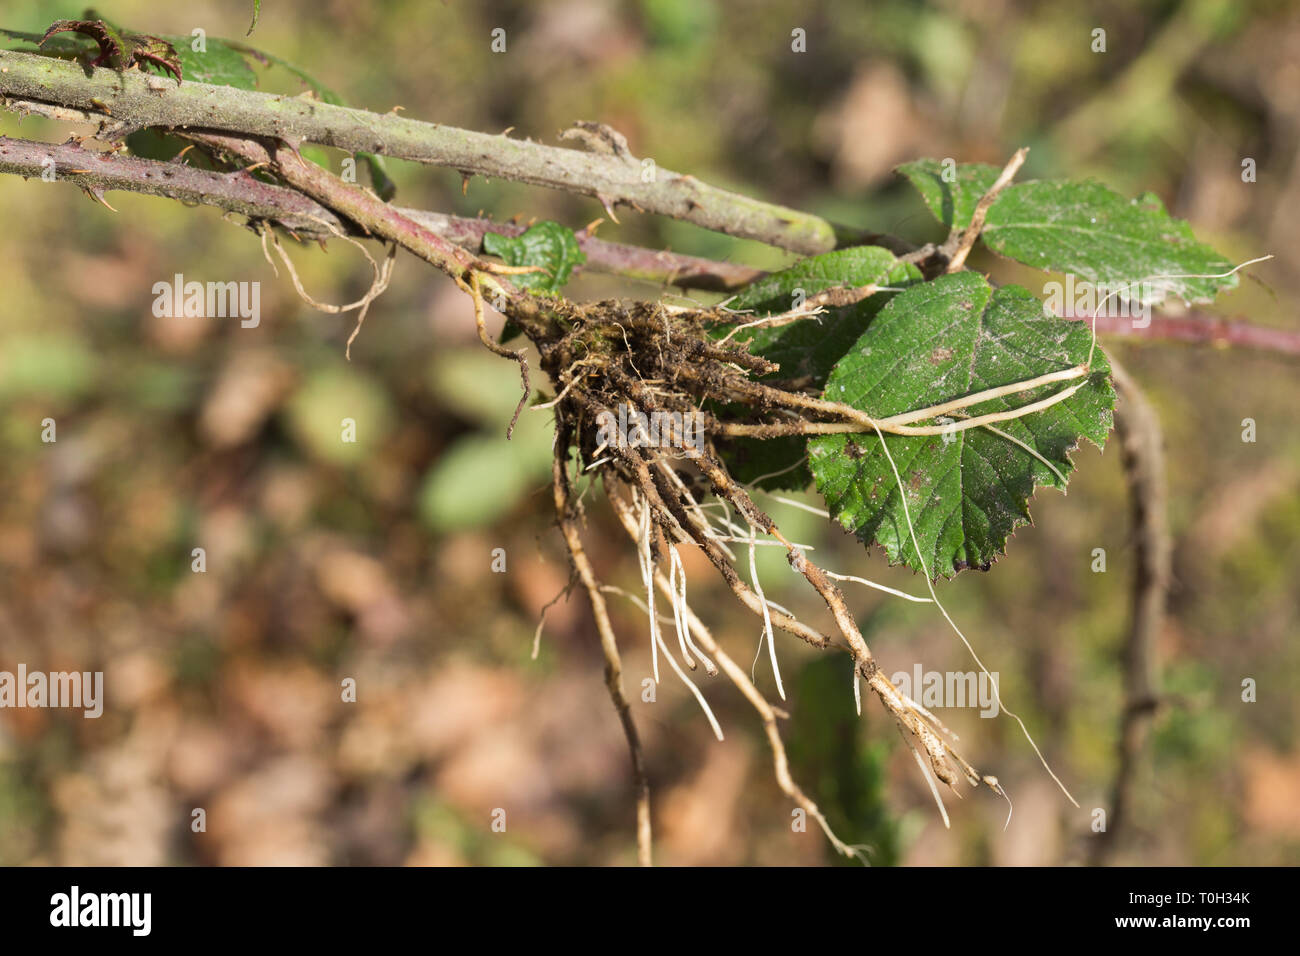 Bramble or Blackberry (Rubus fruticosus). Leaves and section of sprawling, clambering, climbing stem - as long as 5m. rooting where it touches the ground. Here an uprooted terminal tip. Stock Photo